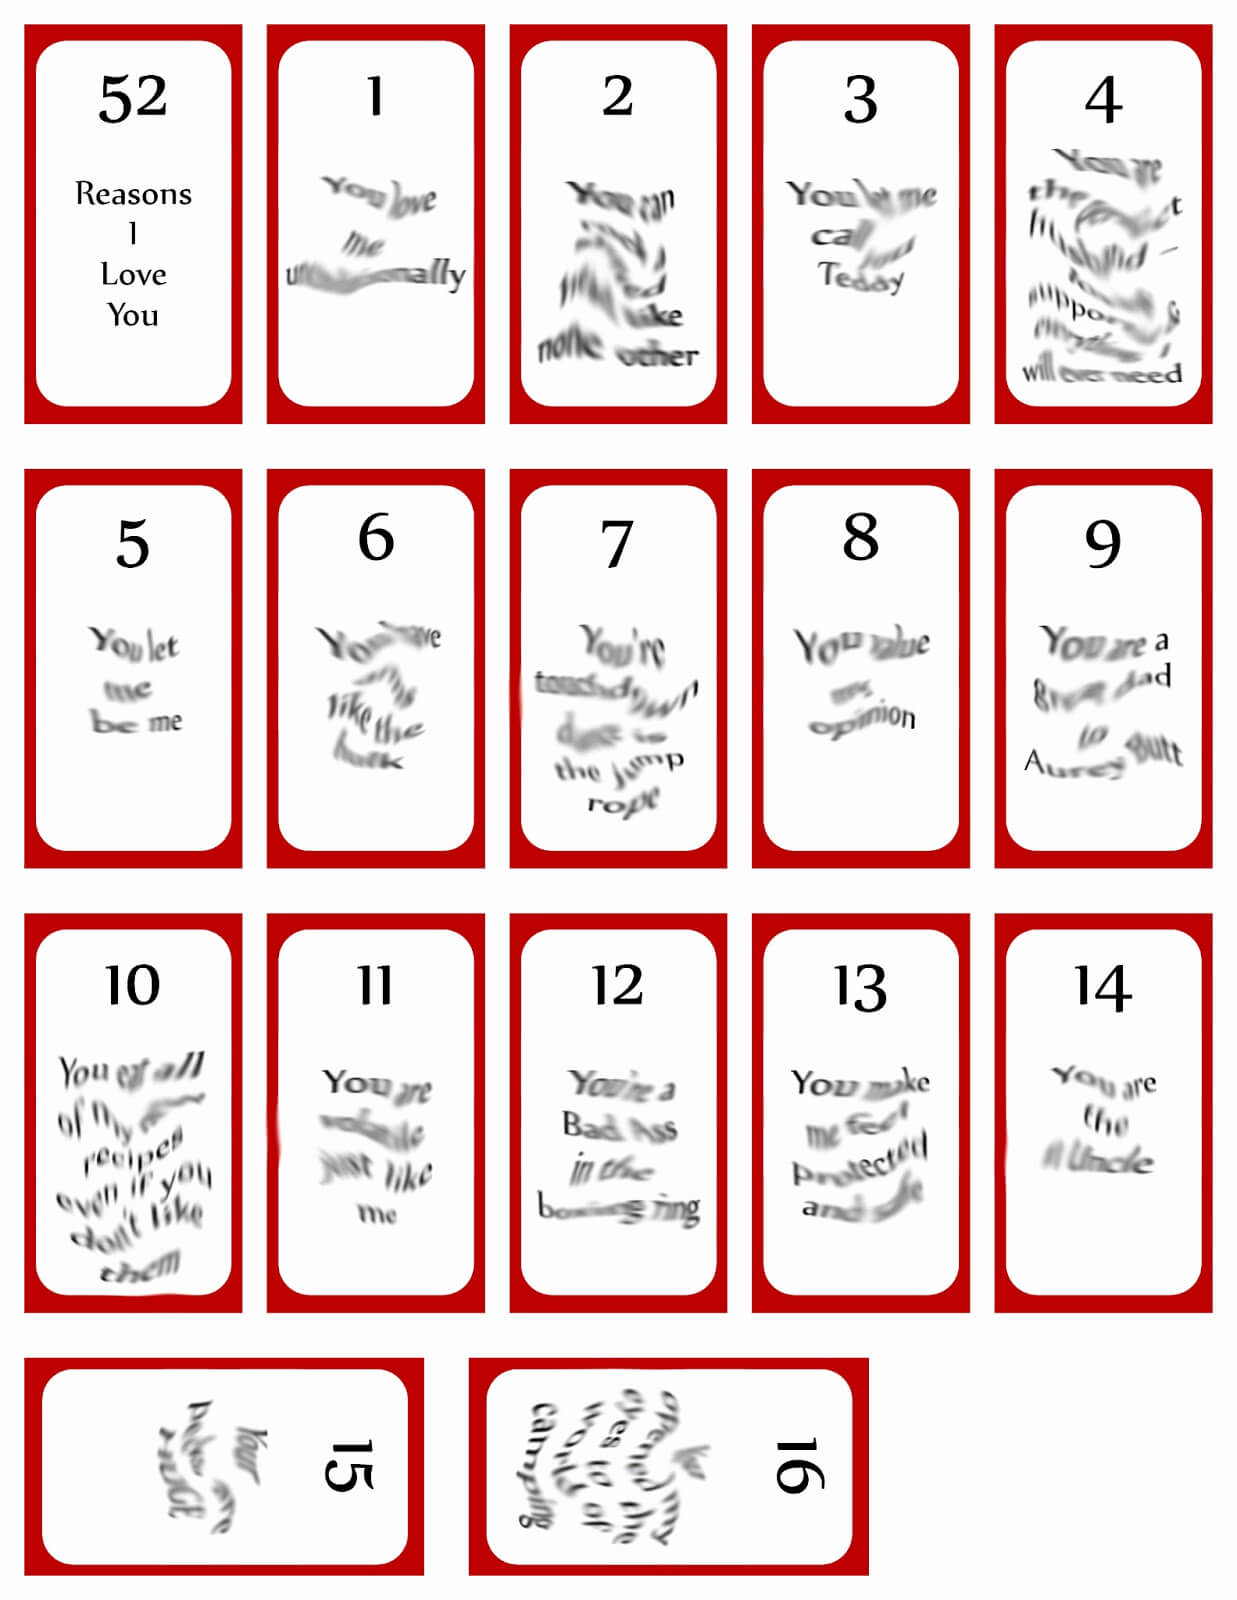 52 Reasons Why I Love You Cards Printable Templates Free With Regard To 52 Reasons Why I Love You Cards Templates